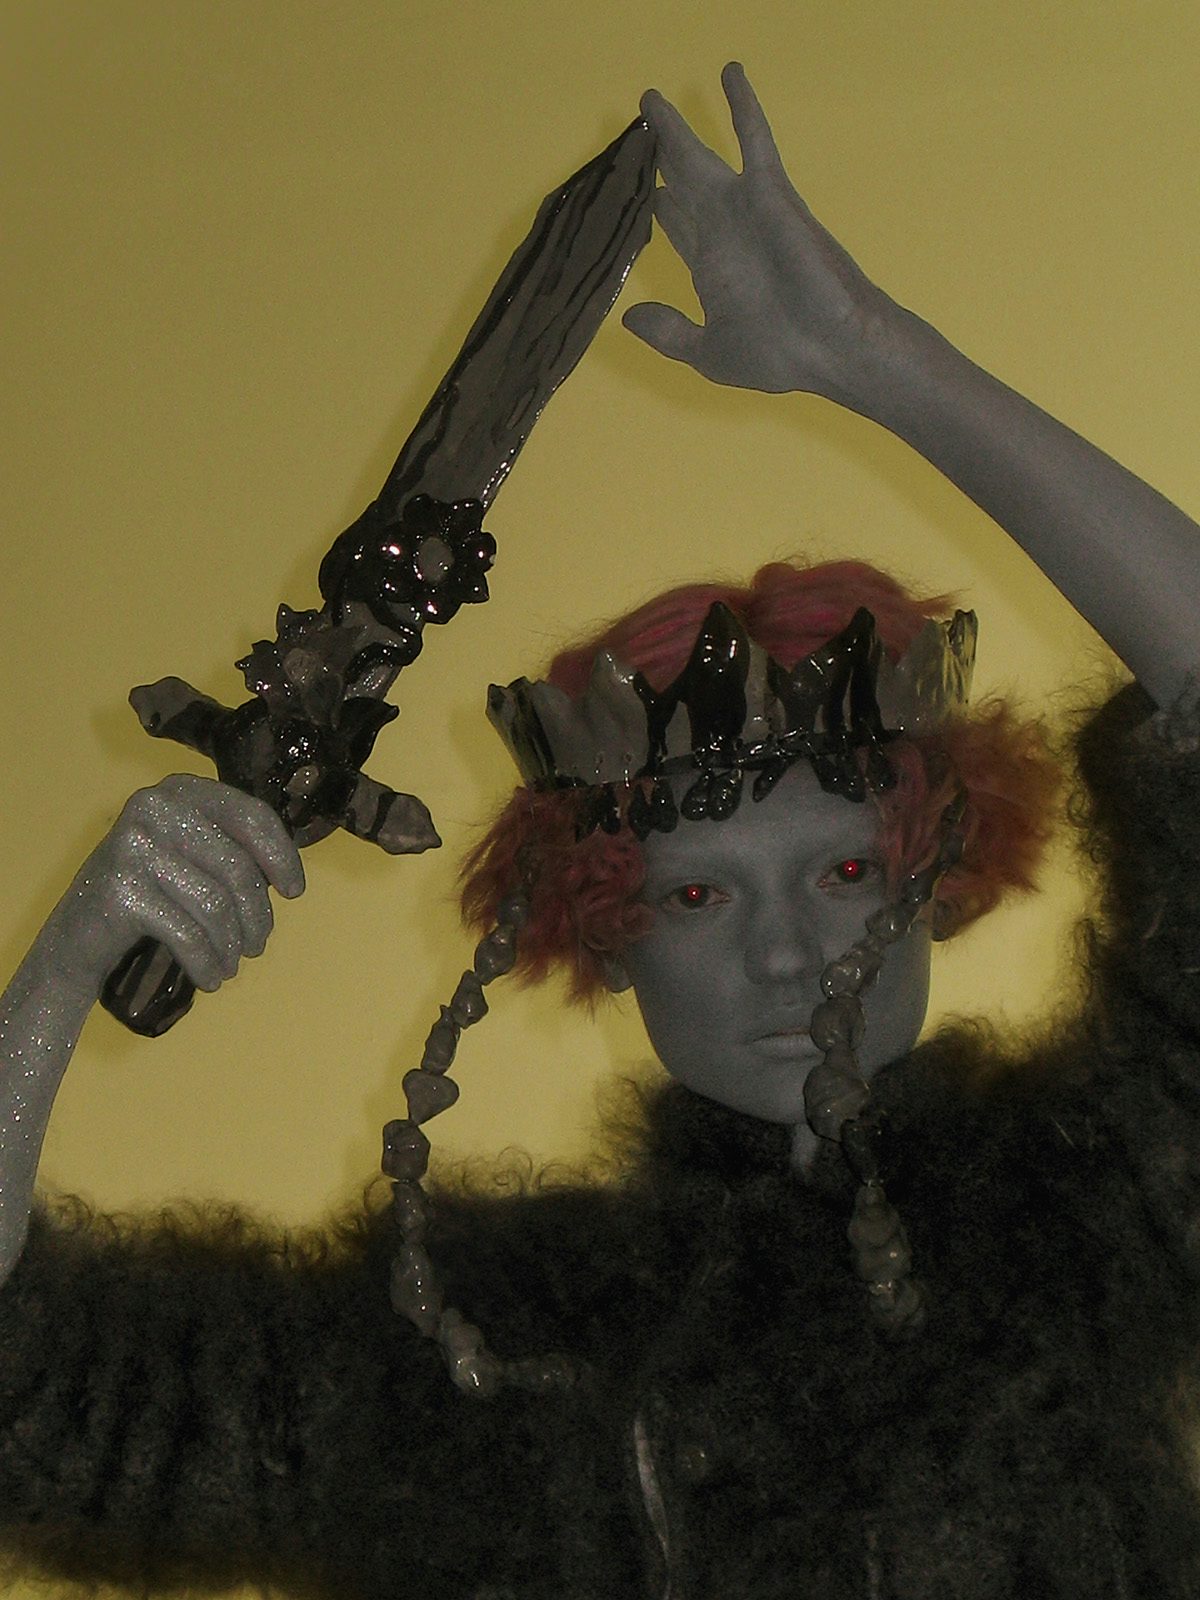 Image by Harley Weir of a person with green shimmering holding a sword above their head and wearing a fluffy garment and a headpiece